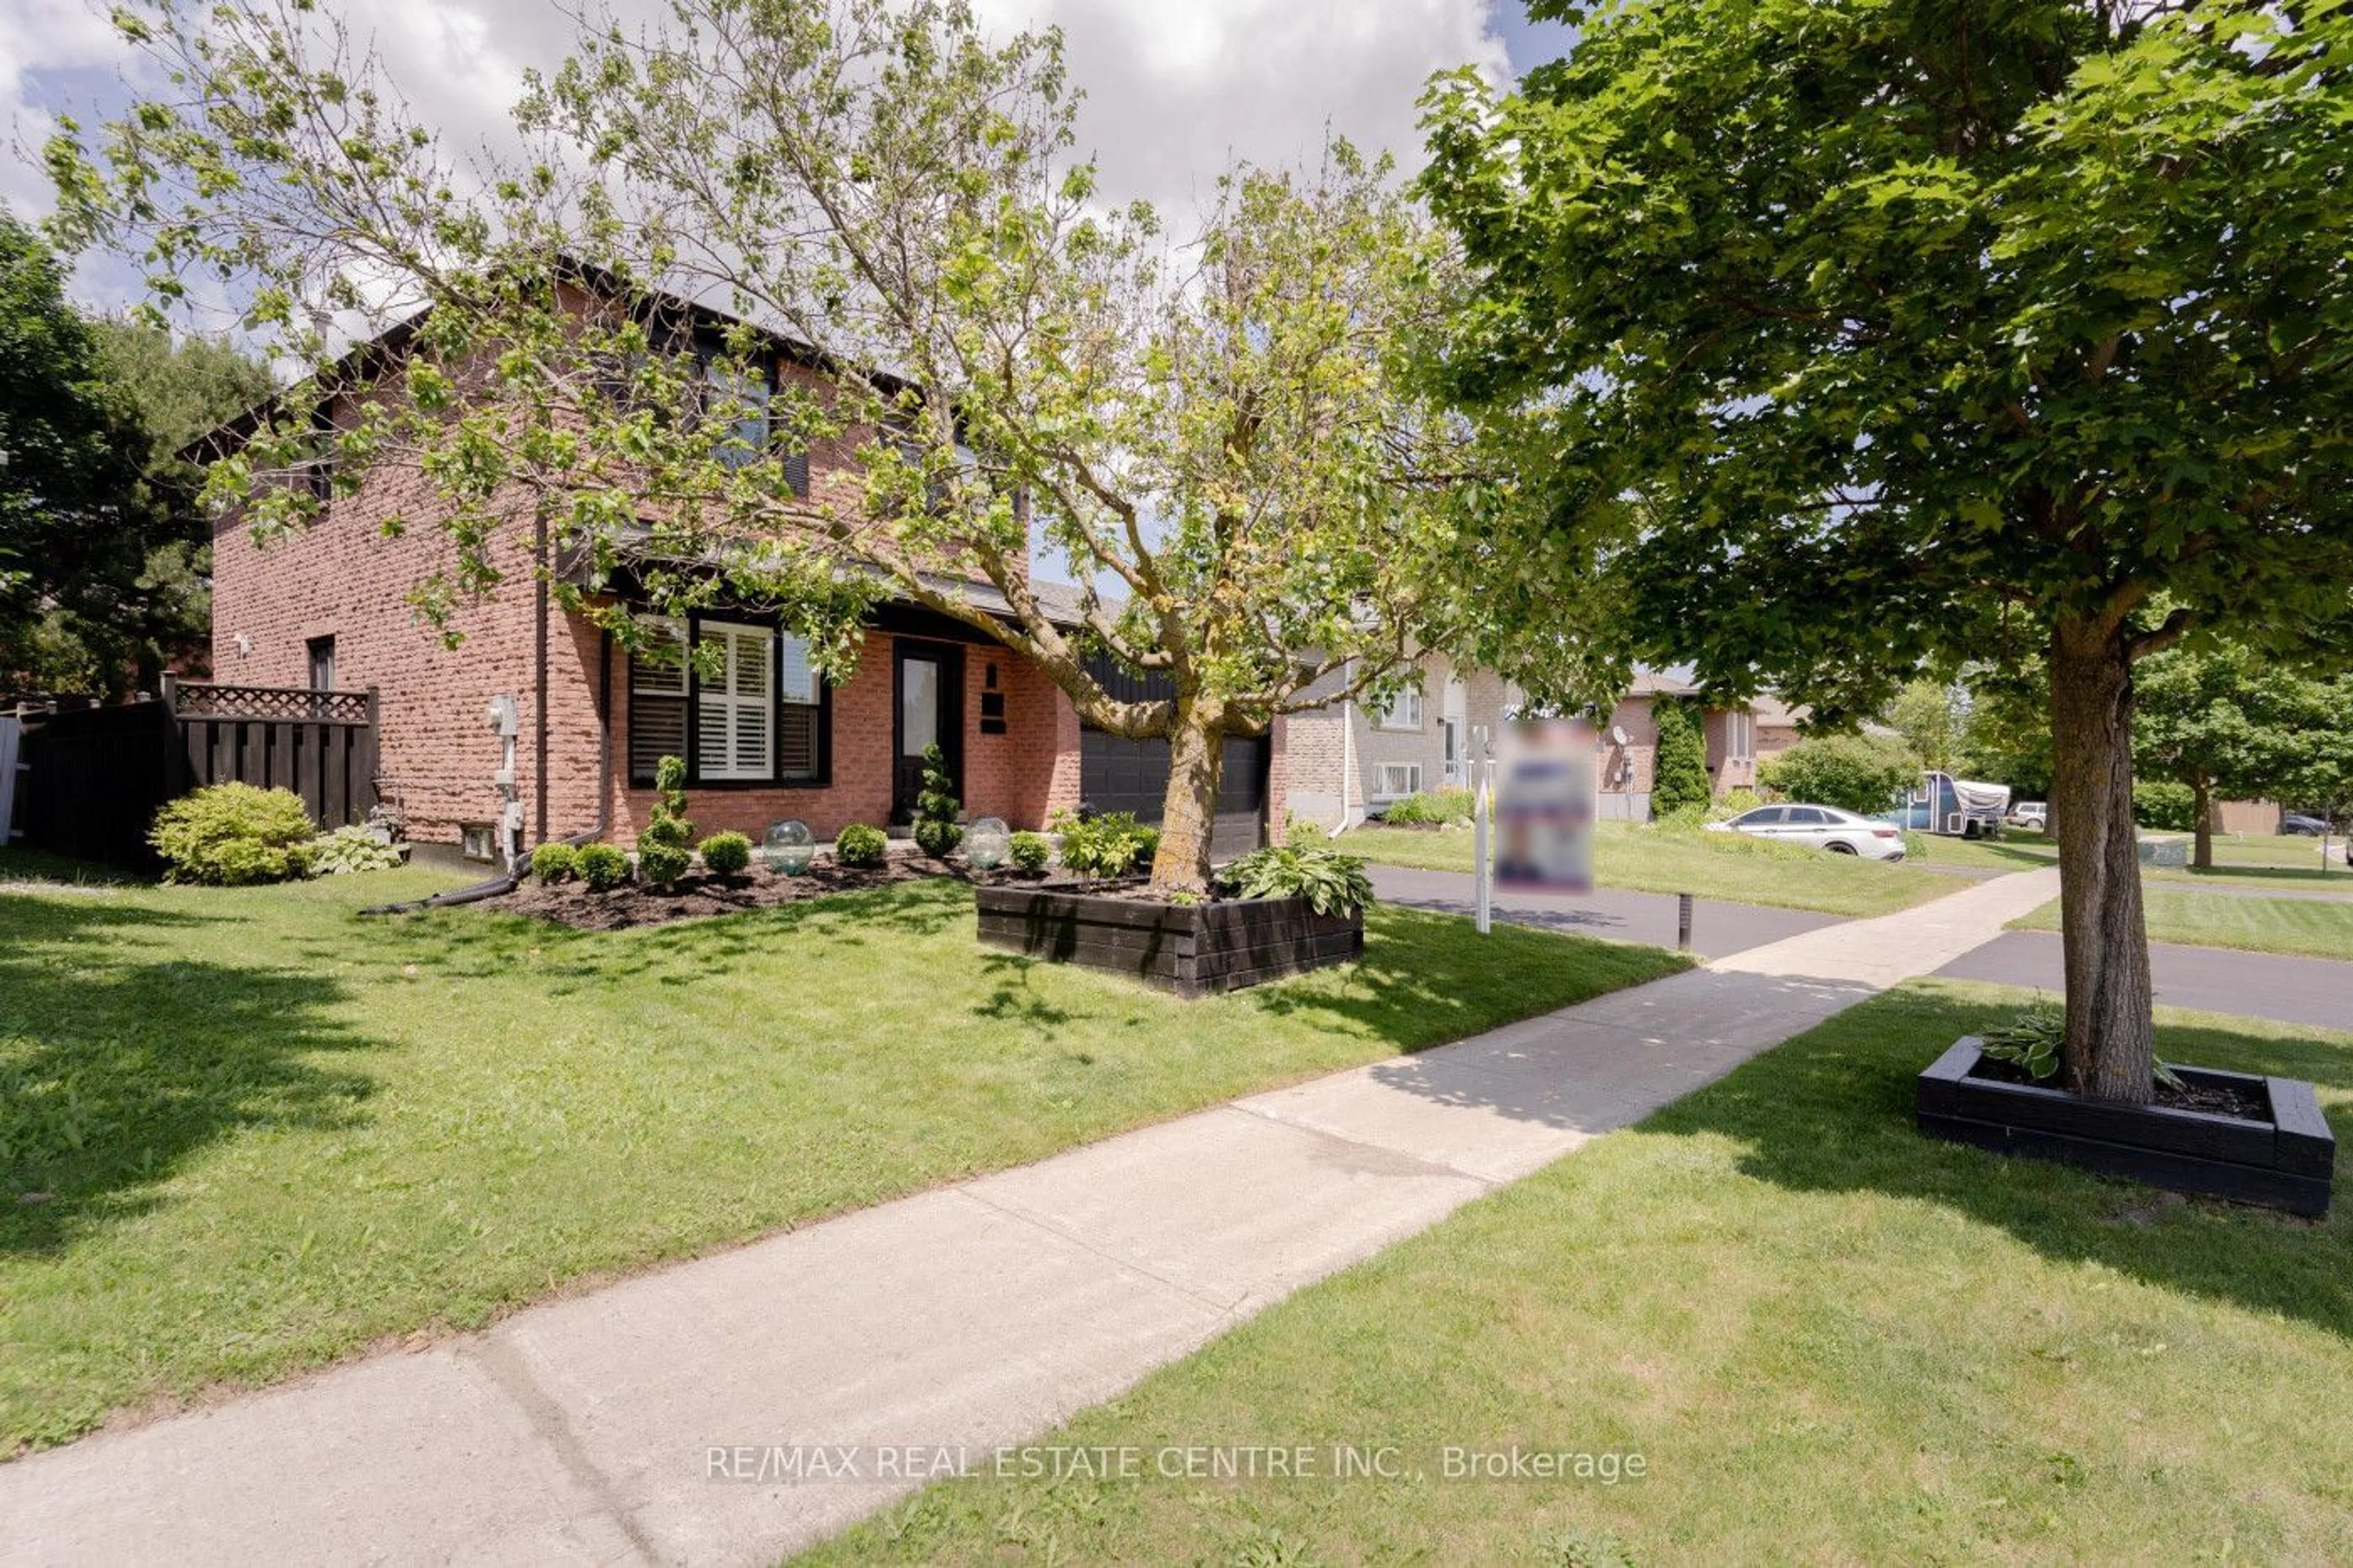 Street view for 433 College Ave, Orangeville Ontario L9W 4H4